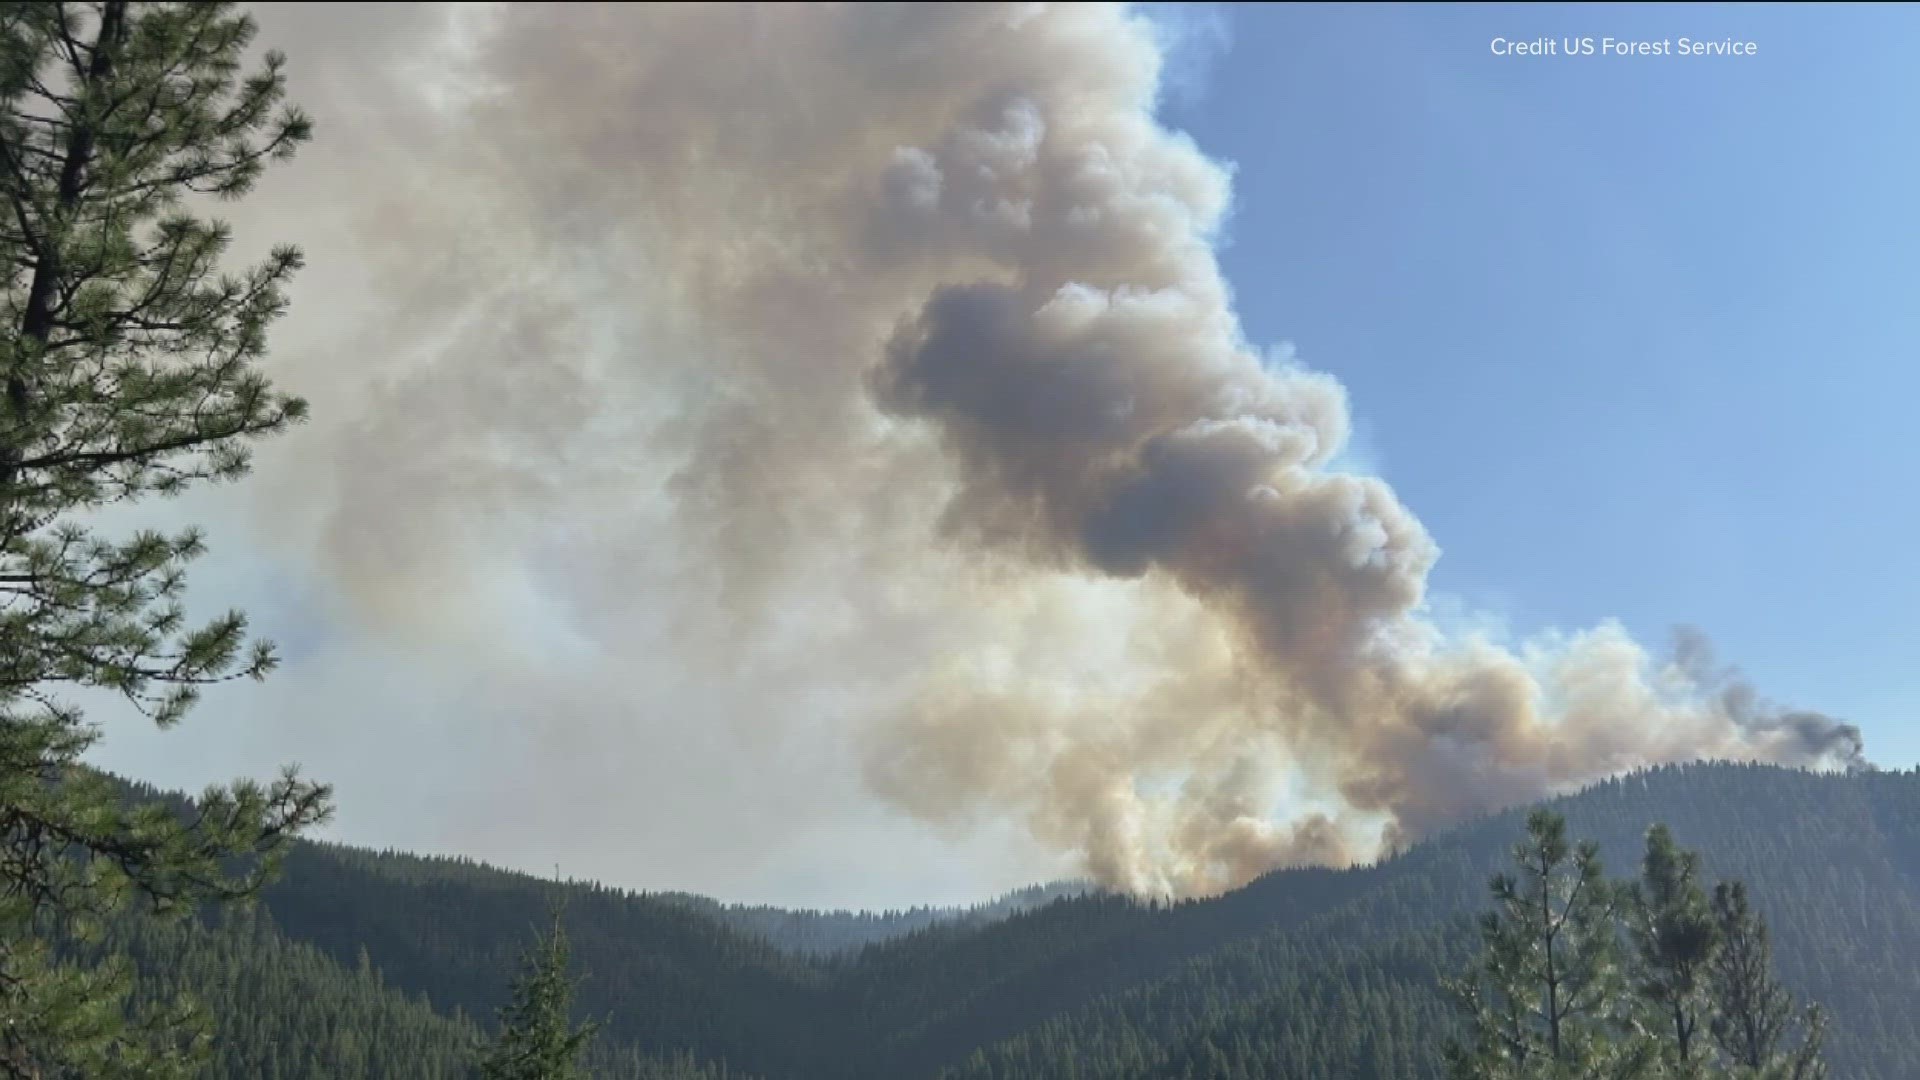 A wildfire spotted Wednesday afternoon in the Cascade Ranger District has quickly burned an estimated 100 acres, the U.S. Forest Service said.